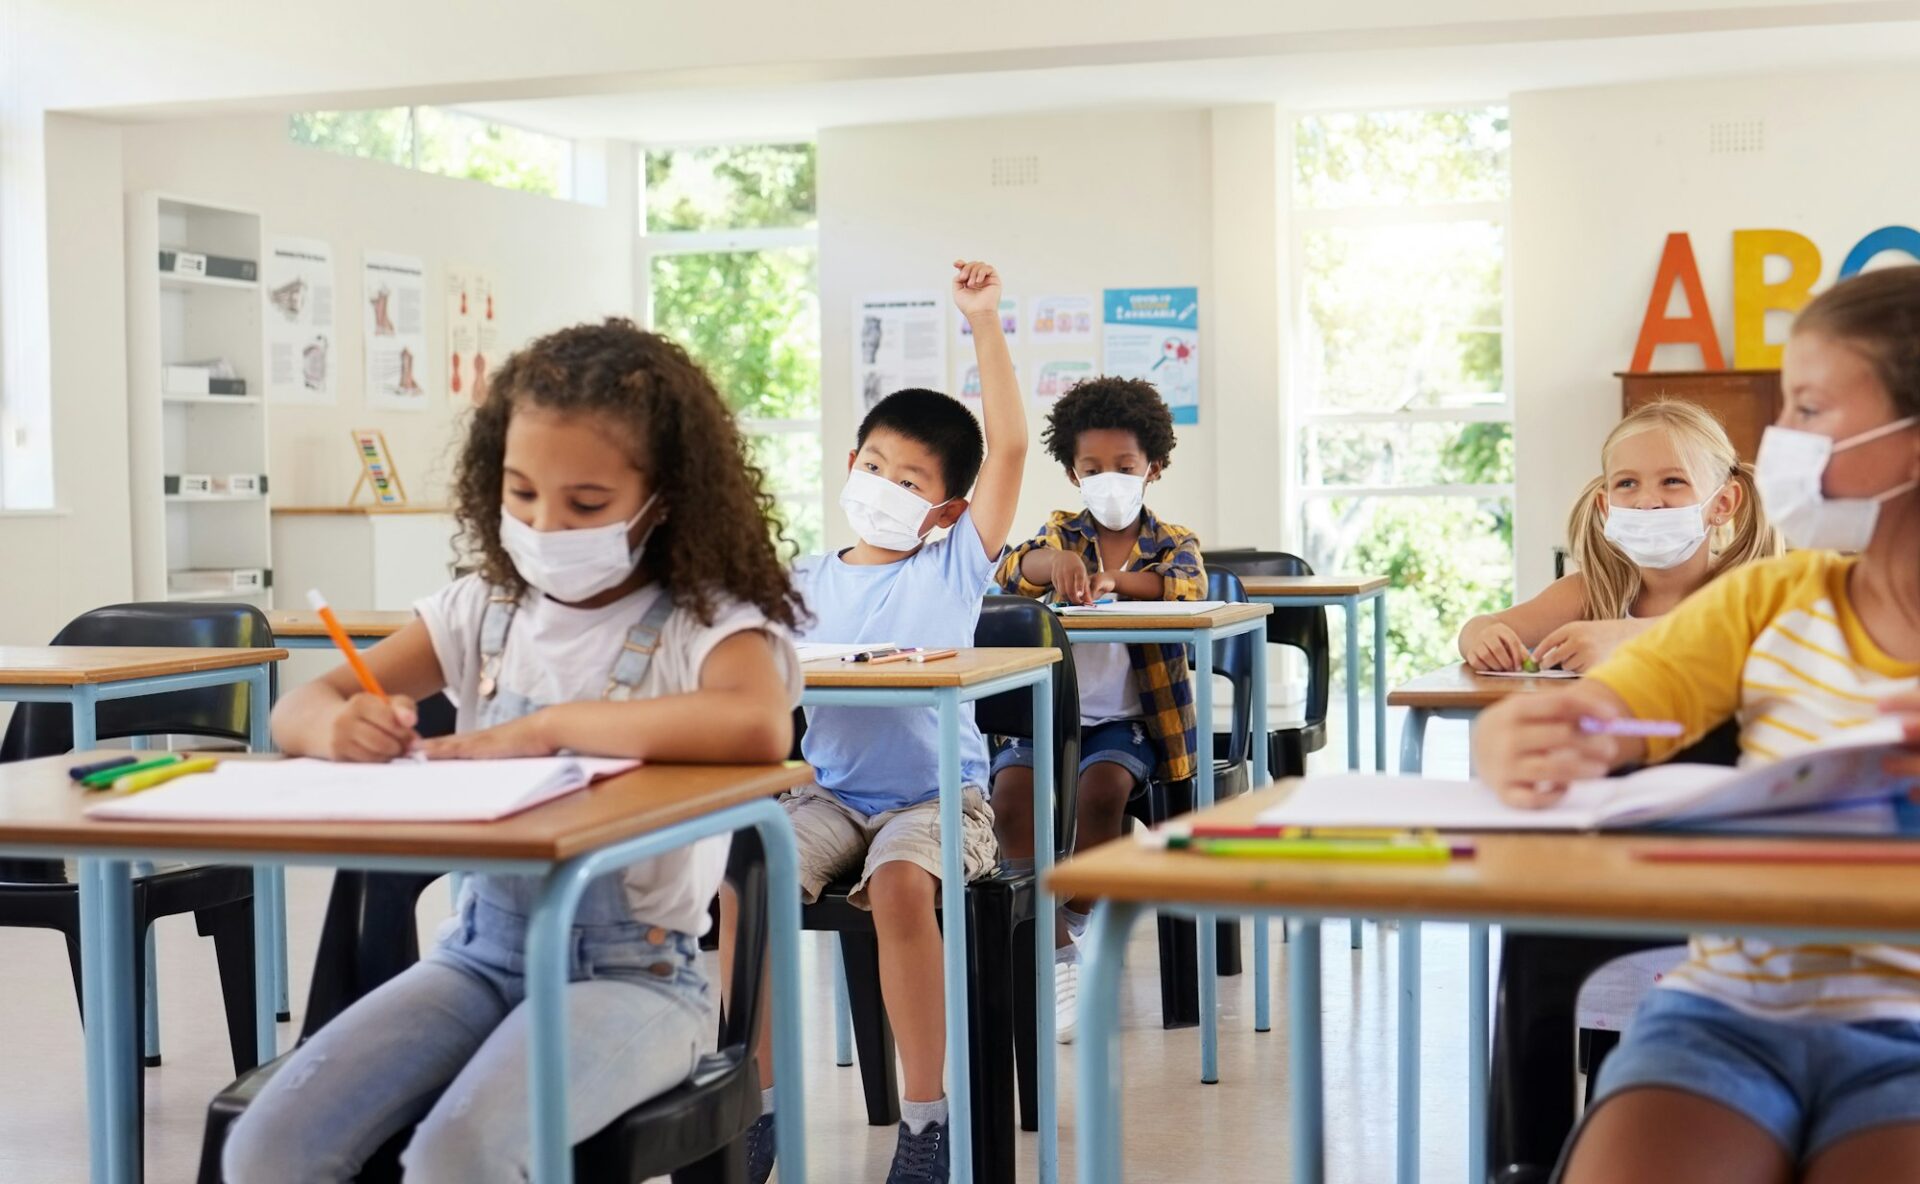 Young kids learning in classroom after covid pandemic, wearing protective face masks. Little childr